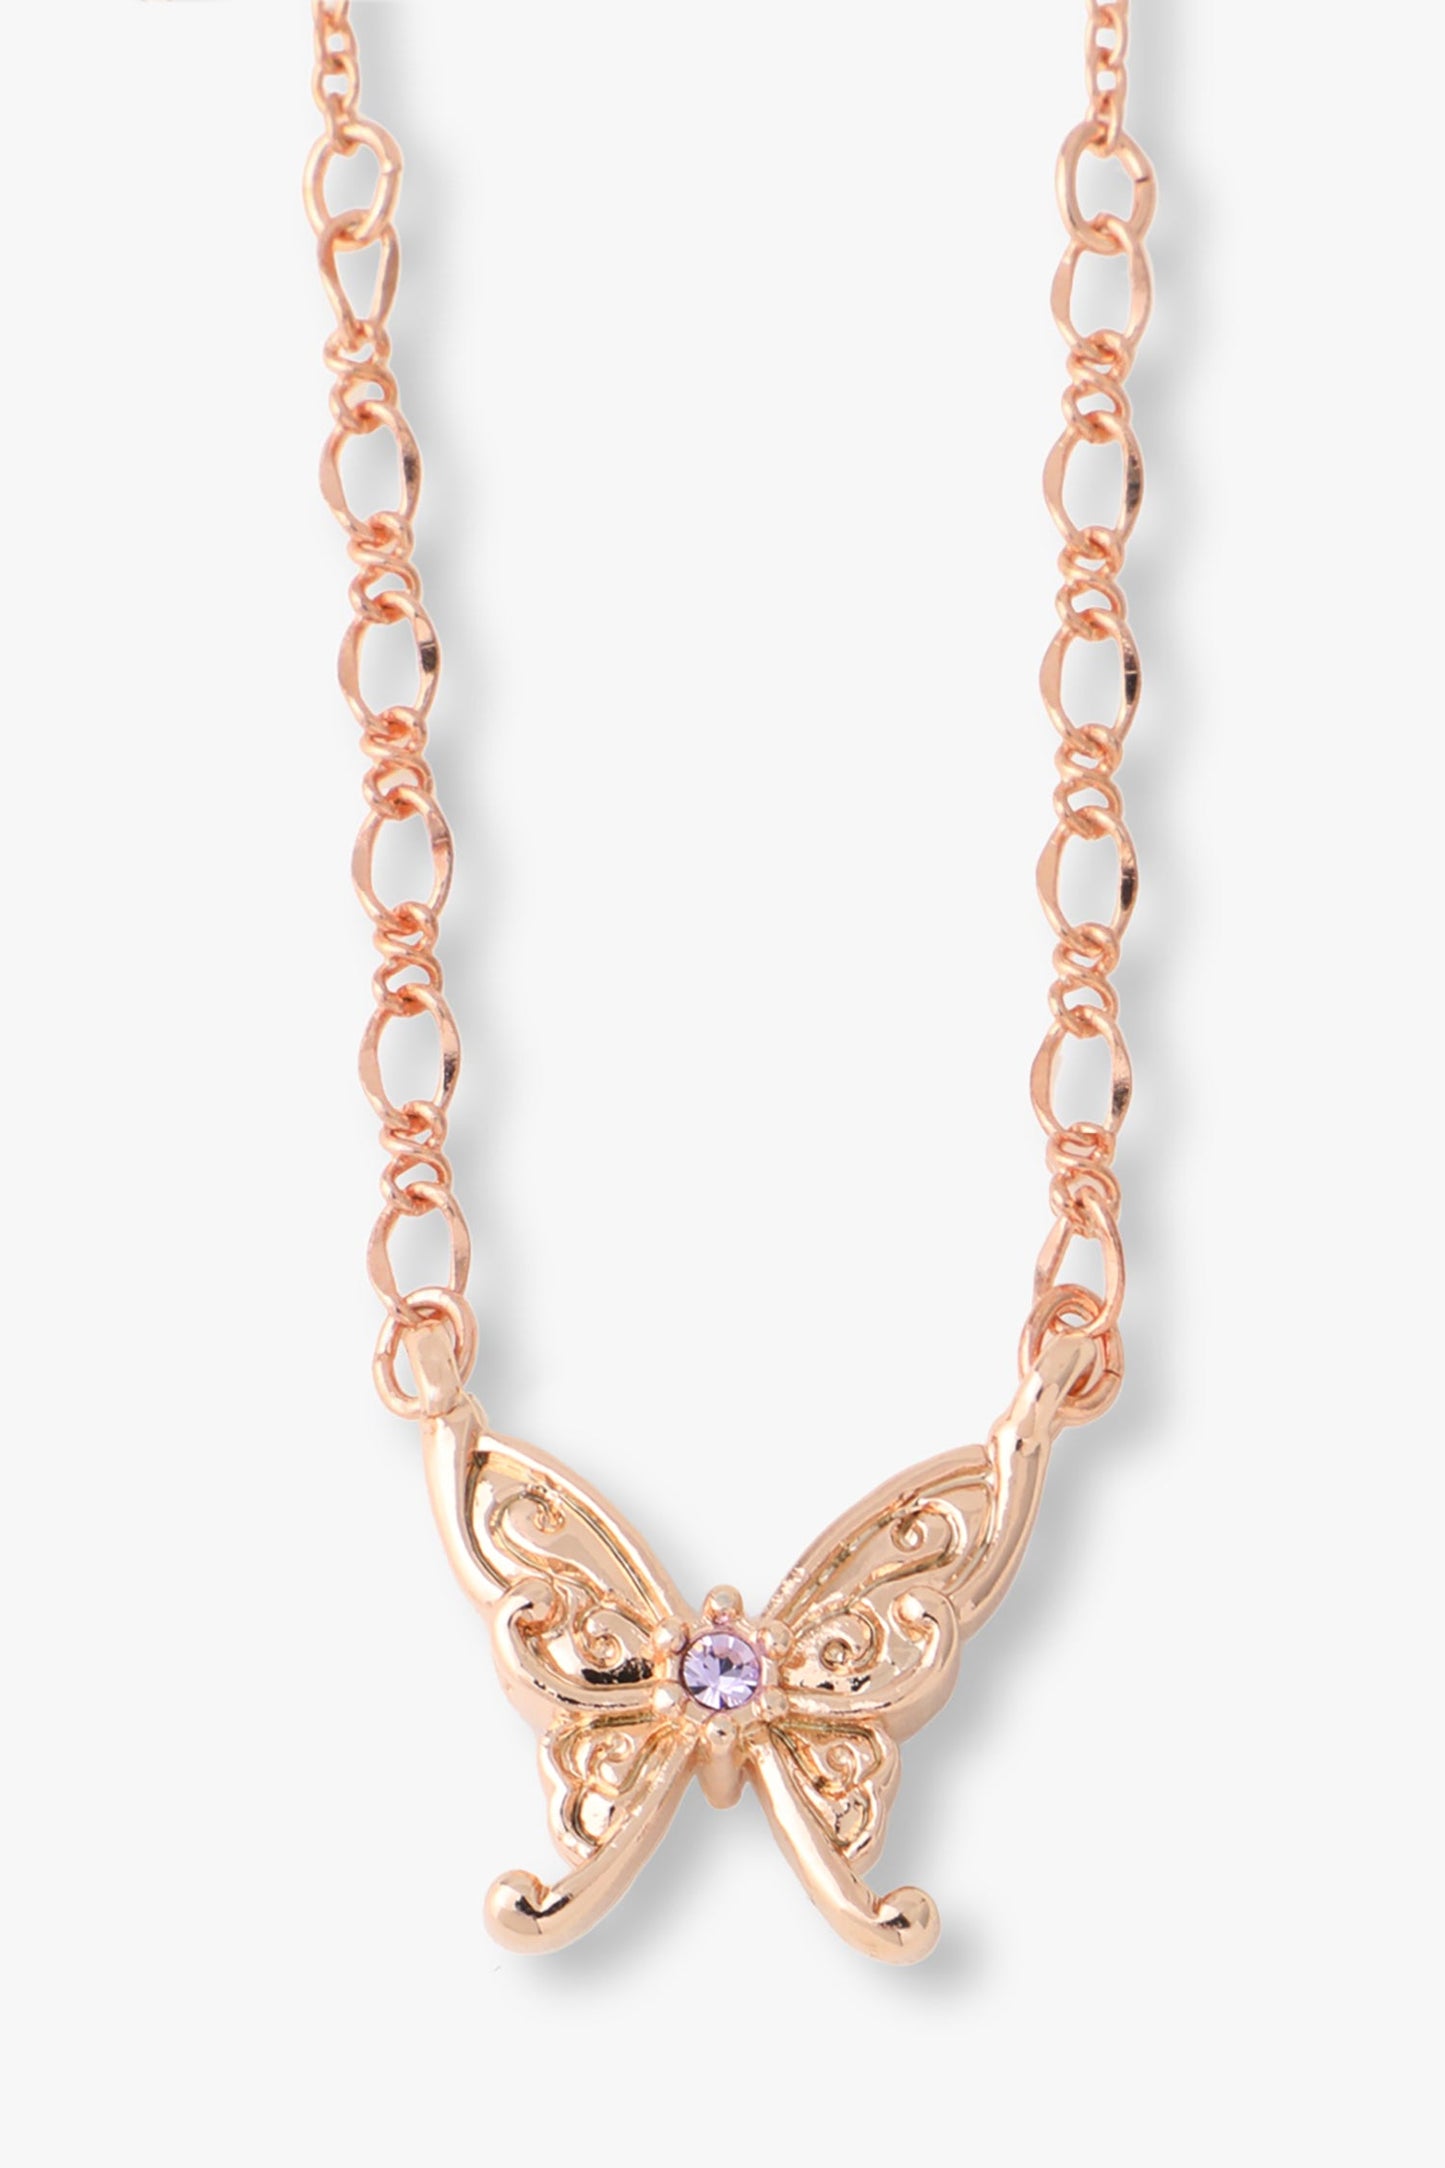 Butterfly and Moon Necklace Rose Gold Set Necklace large links closed to butterfly